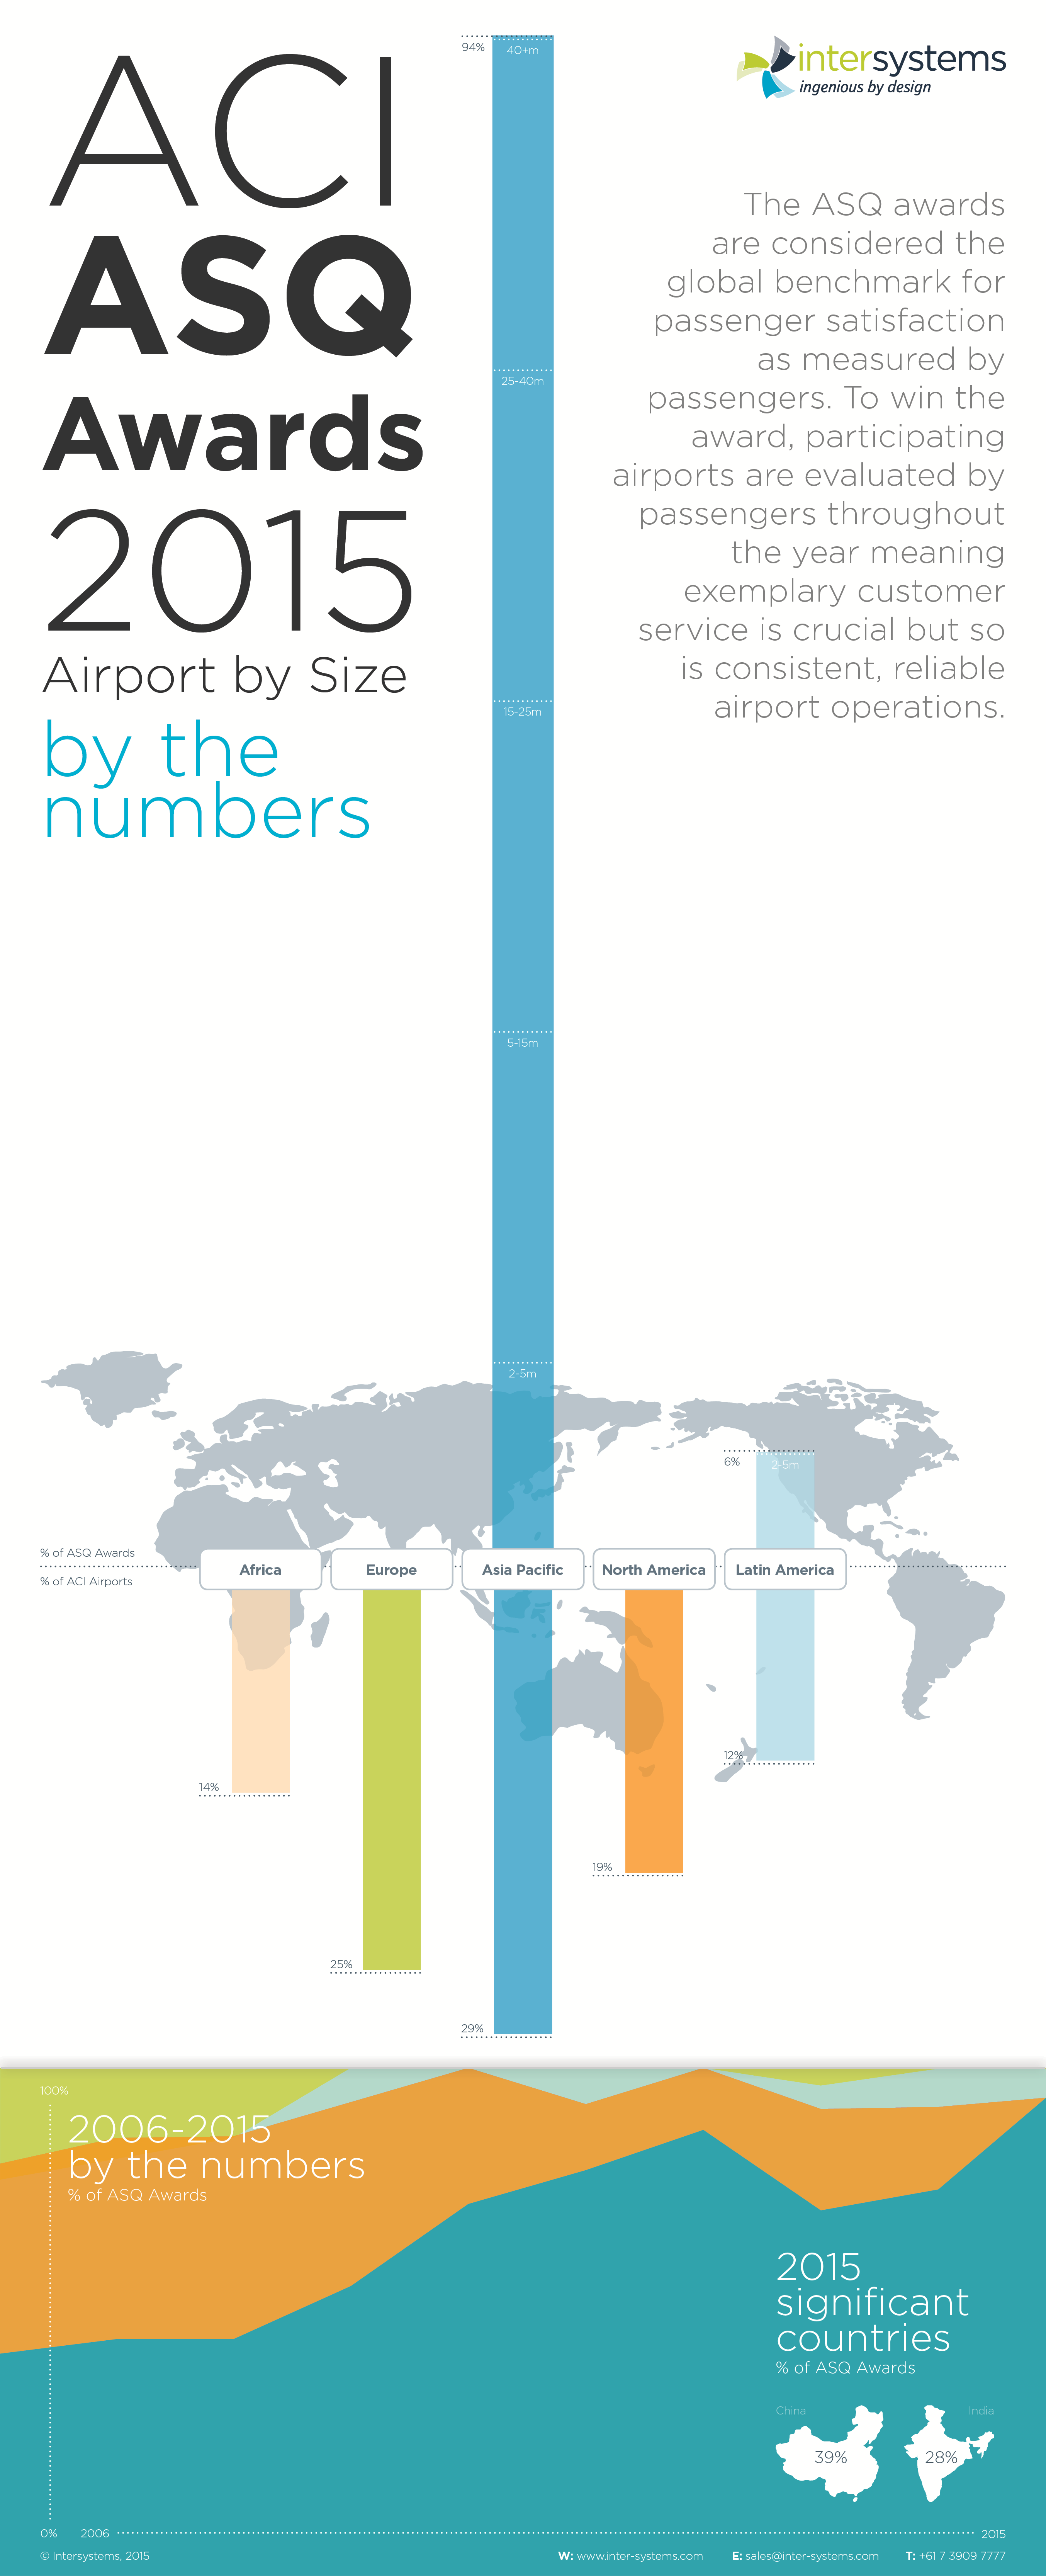 ACI ASQ Awards 2015, Airport by Size - by the numbers infographic